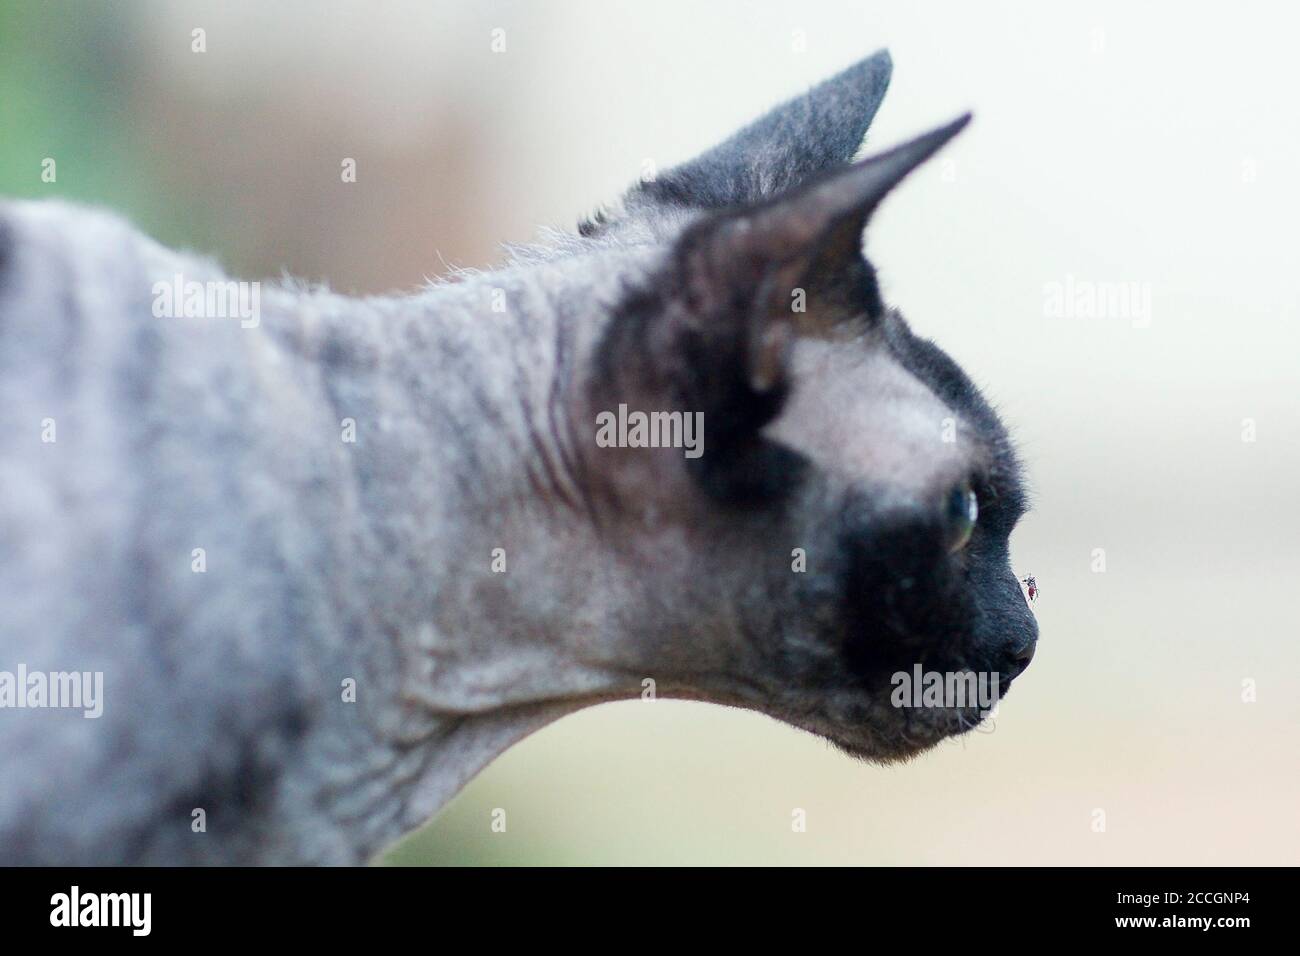 Side view of black Devon Rex cat staring at a mosquito on her nose Stock Photo